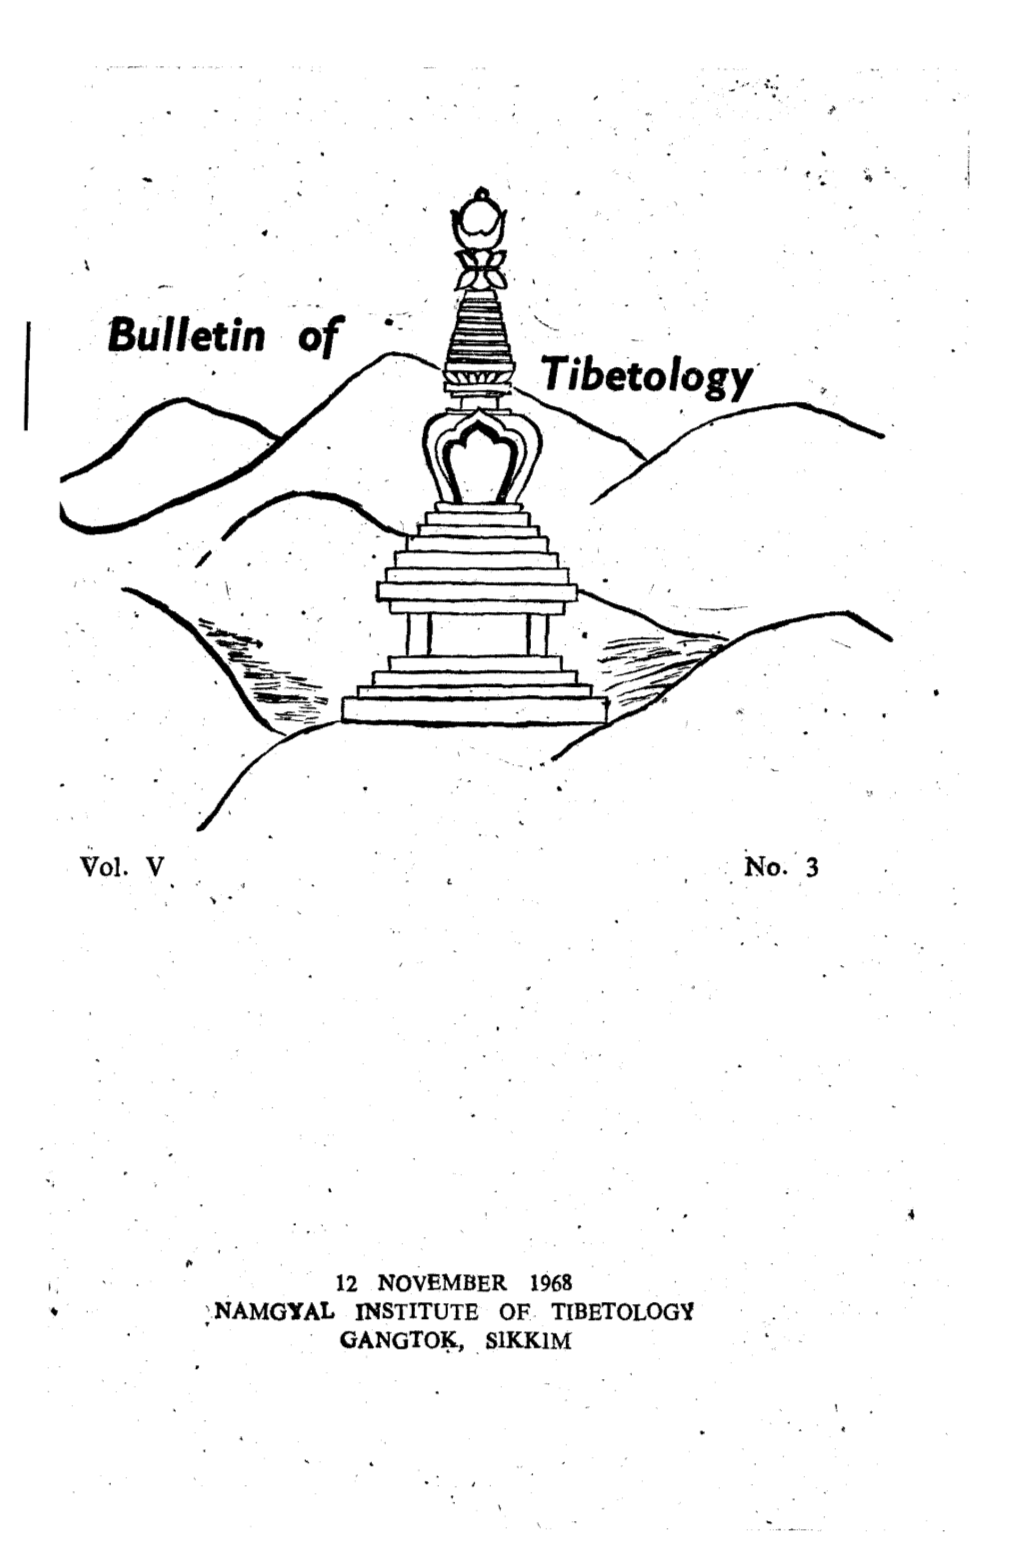 Bulletin of Tibetology Seeks to 'Serve the Sp'o:Ciali.St As Well As Tlie